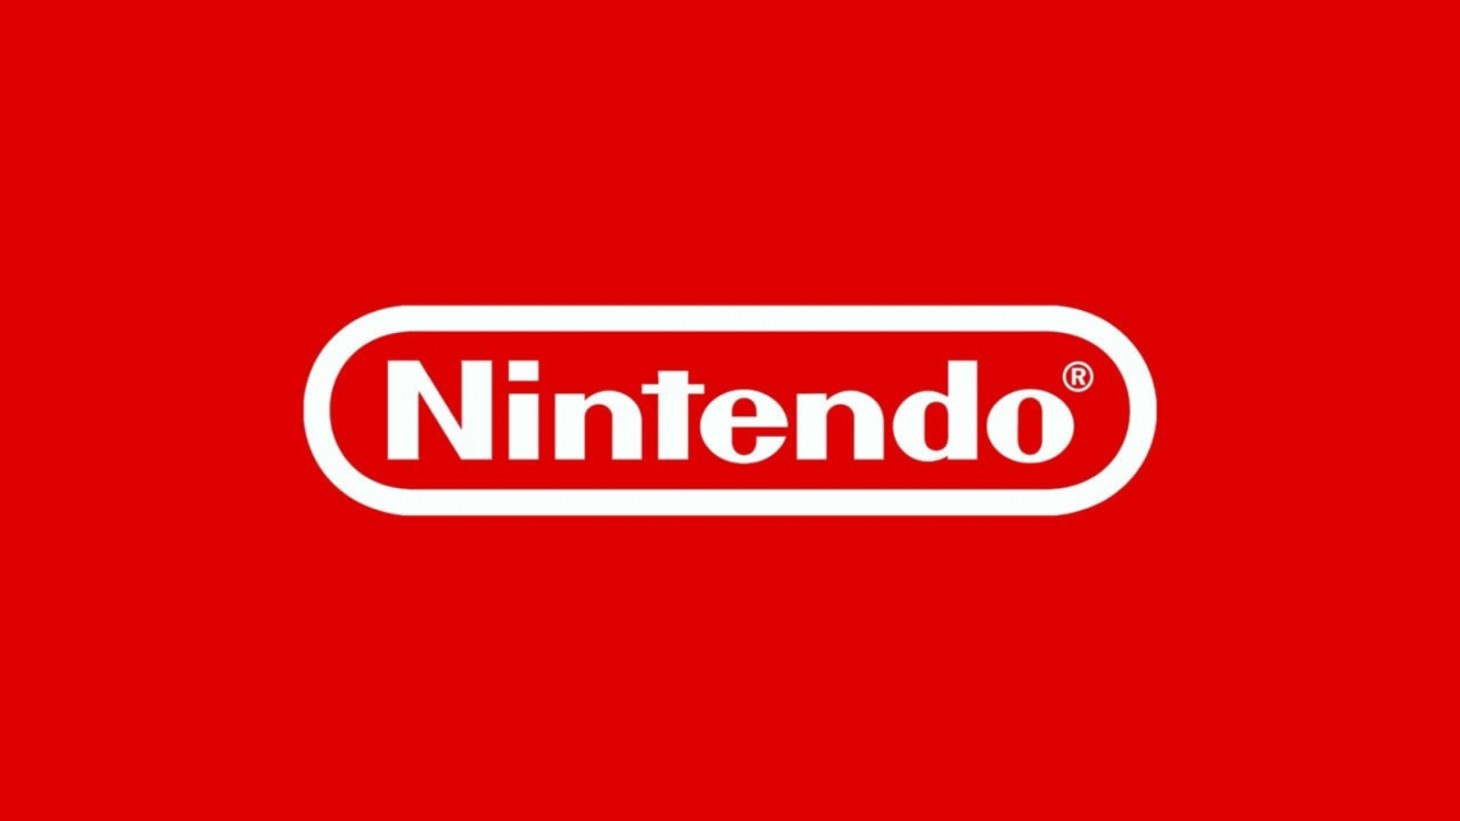 Nintendo Direct September 2023: how to watch and what to expect